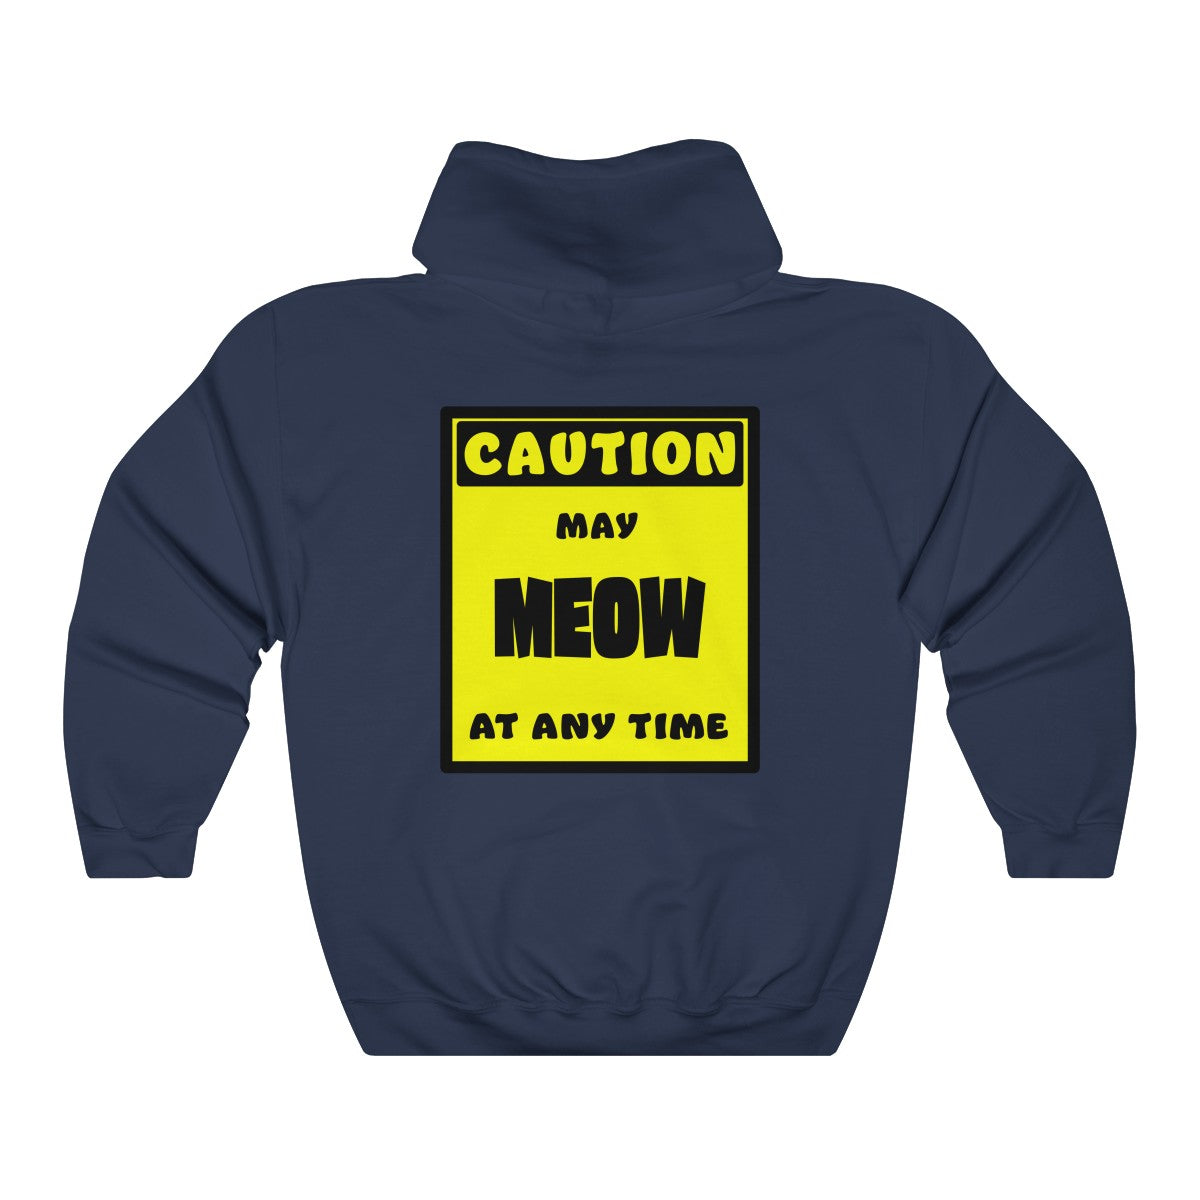 CAUTION! May MEOW at any time! - Hoodie Hoodie AFLT-Whootorca Navy Blue S 